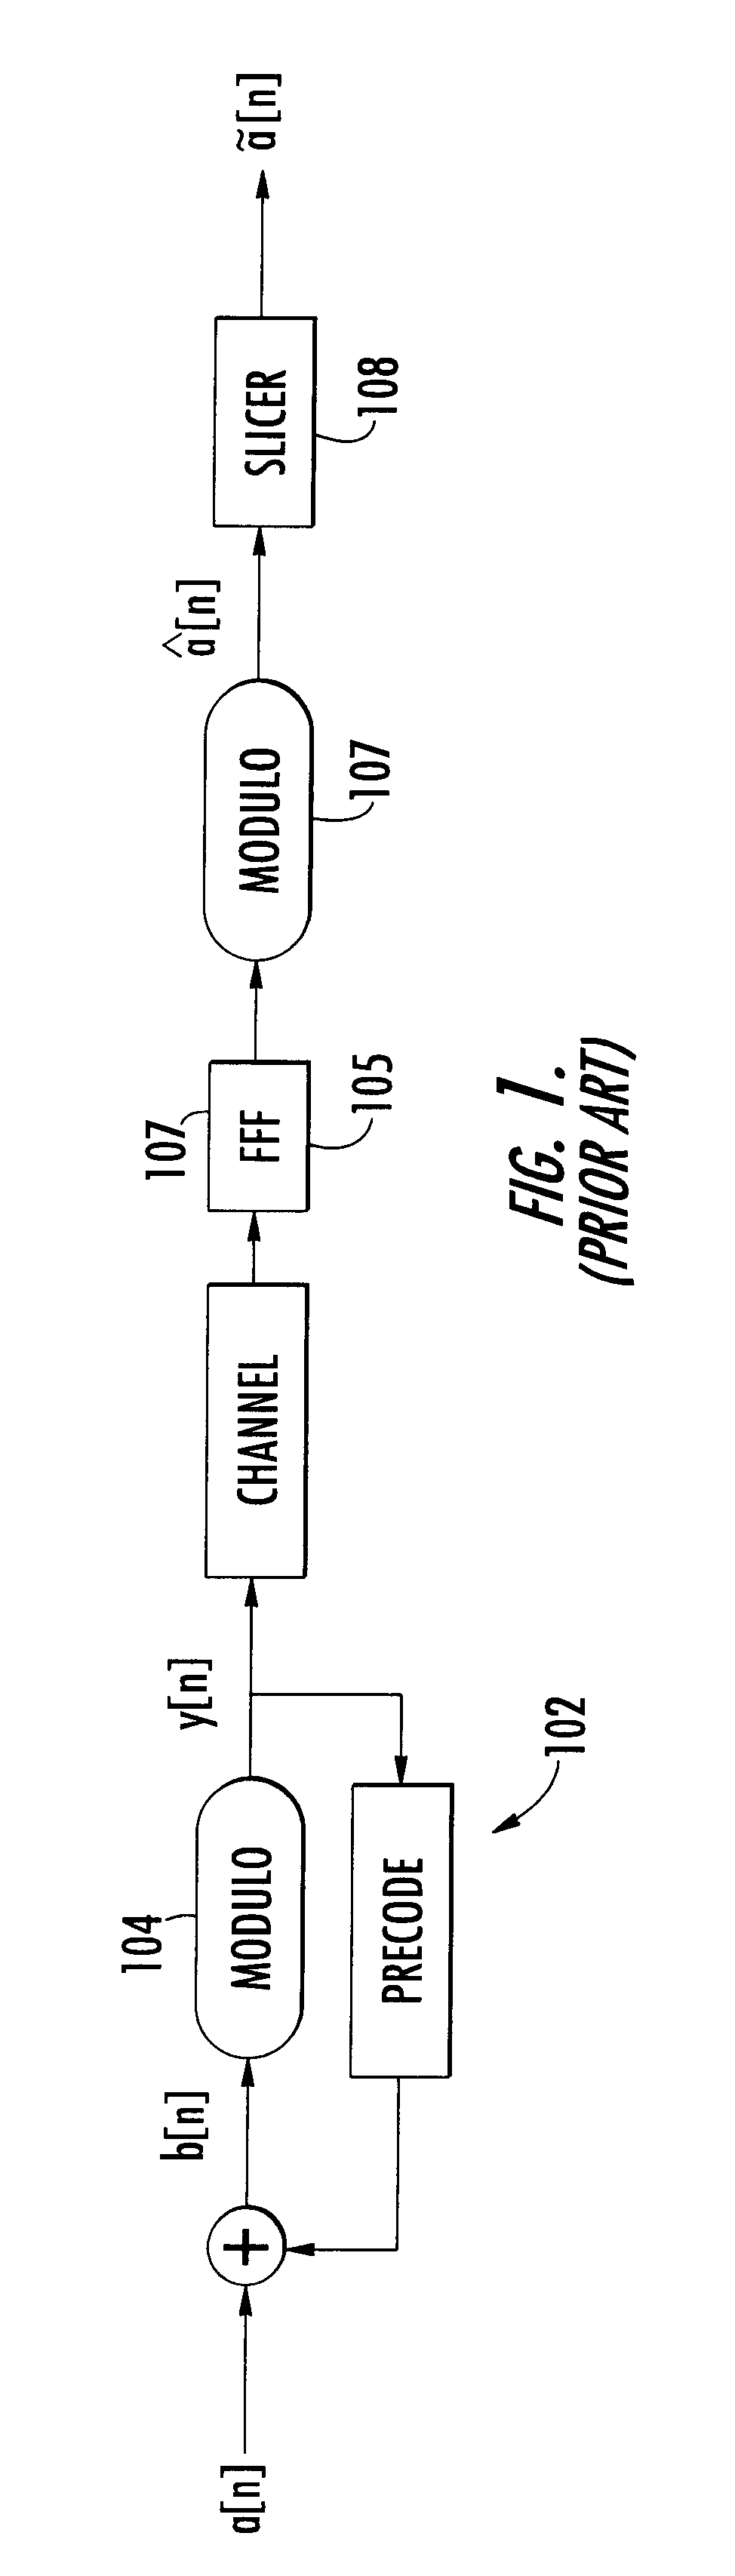 Method and apparatus for adaptively compensating channel or system variations in precoded communications system